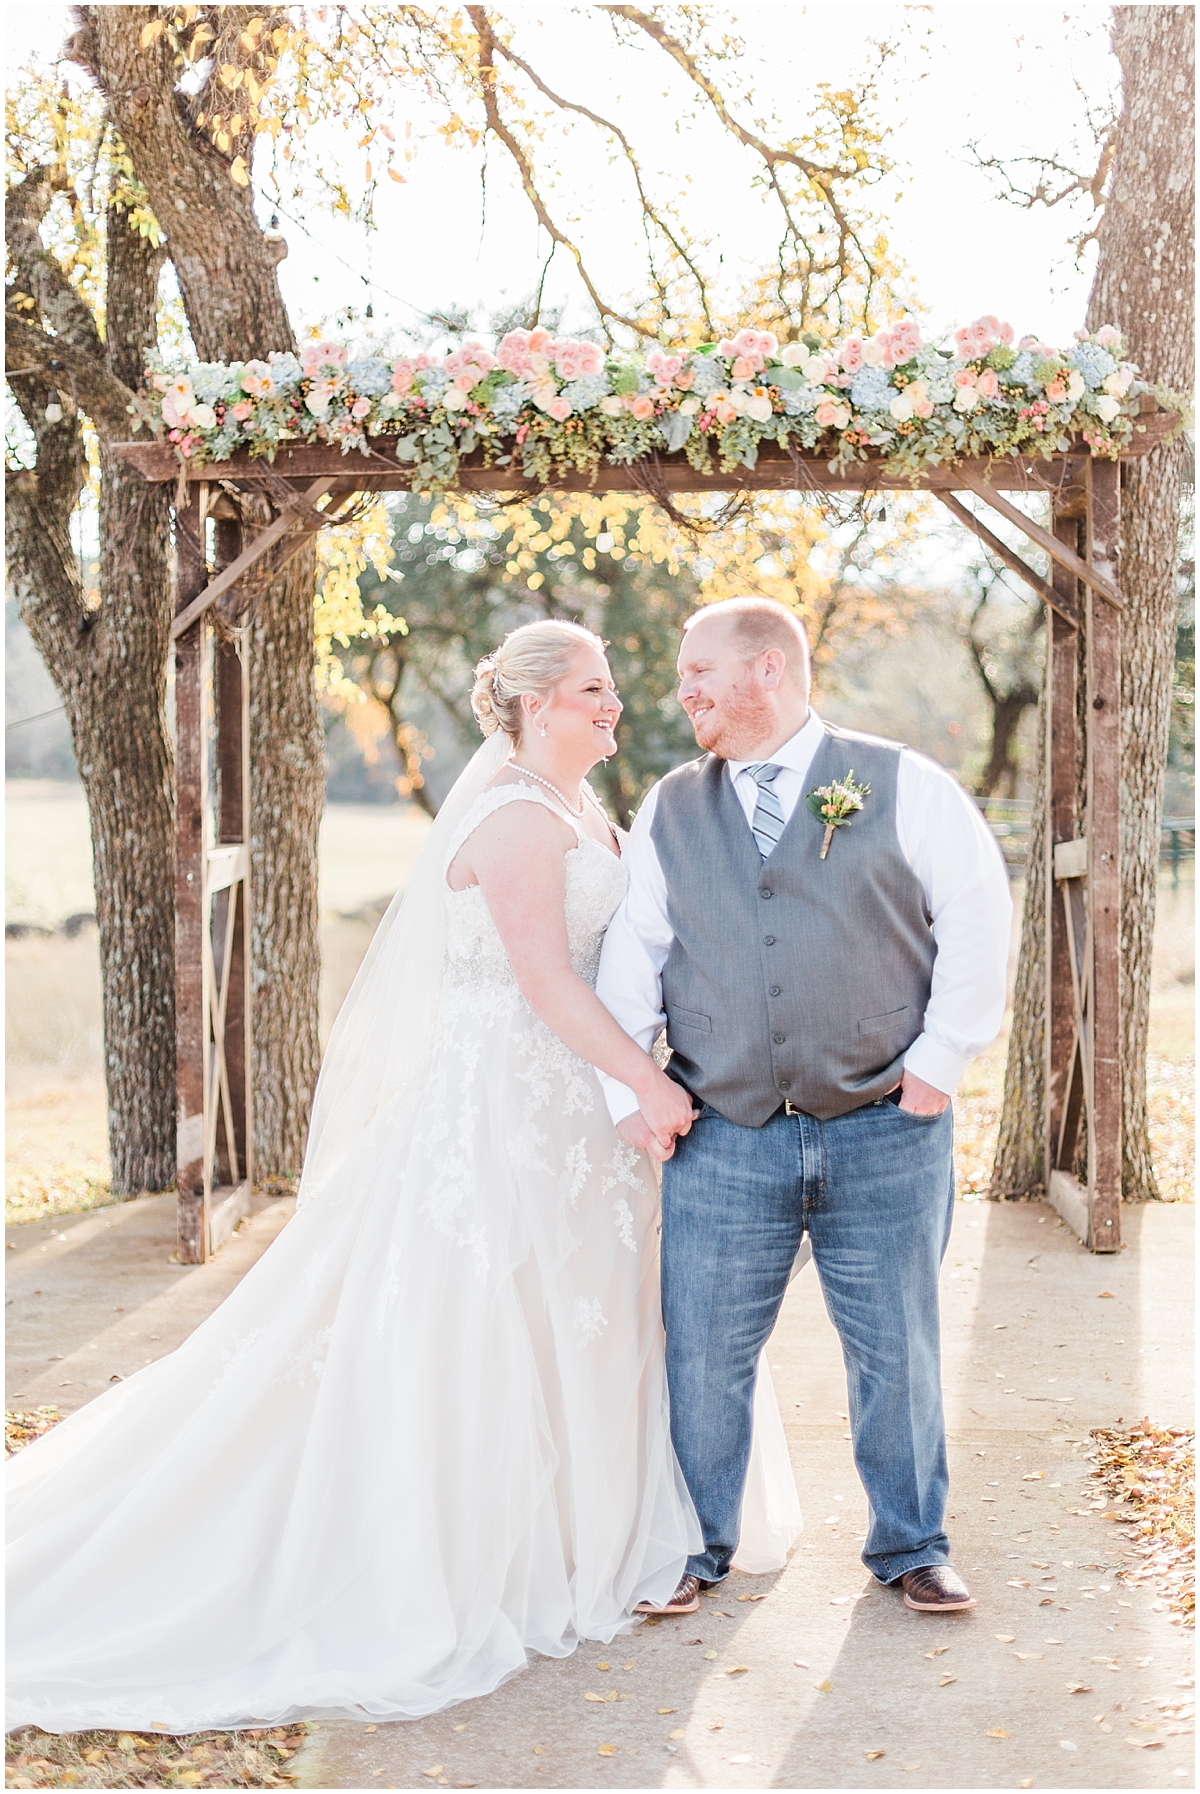 a-slate-blue-and-grey-winter-wedding-at-cw-hill-country-ranch-in-boerne-texas-by-allison-jeffers-wedding-photography_0031